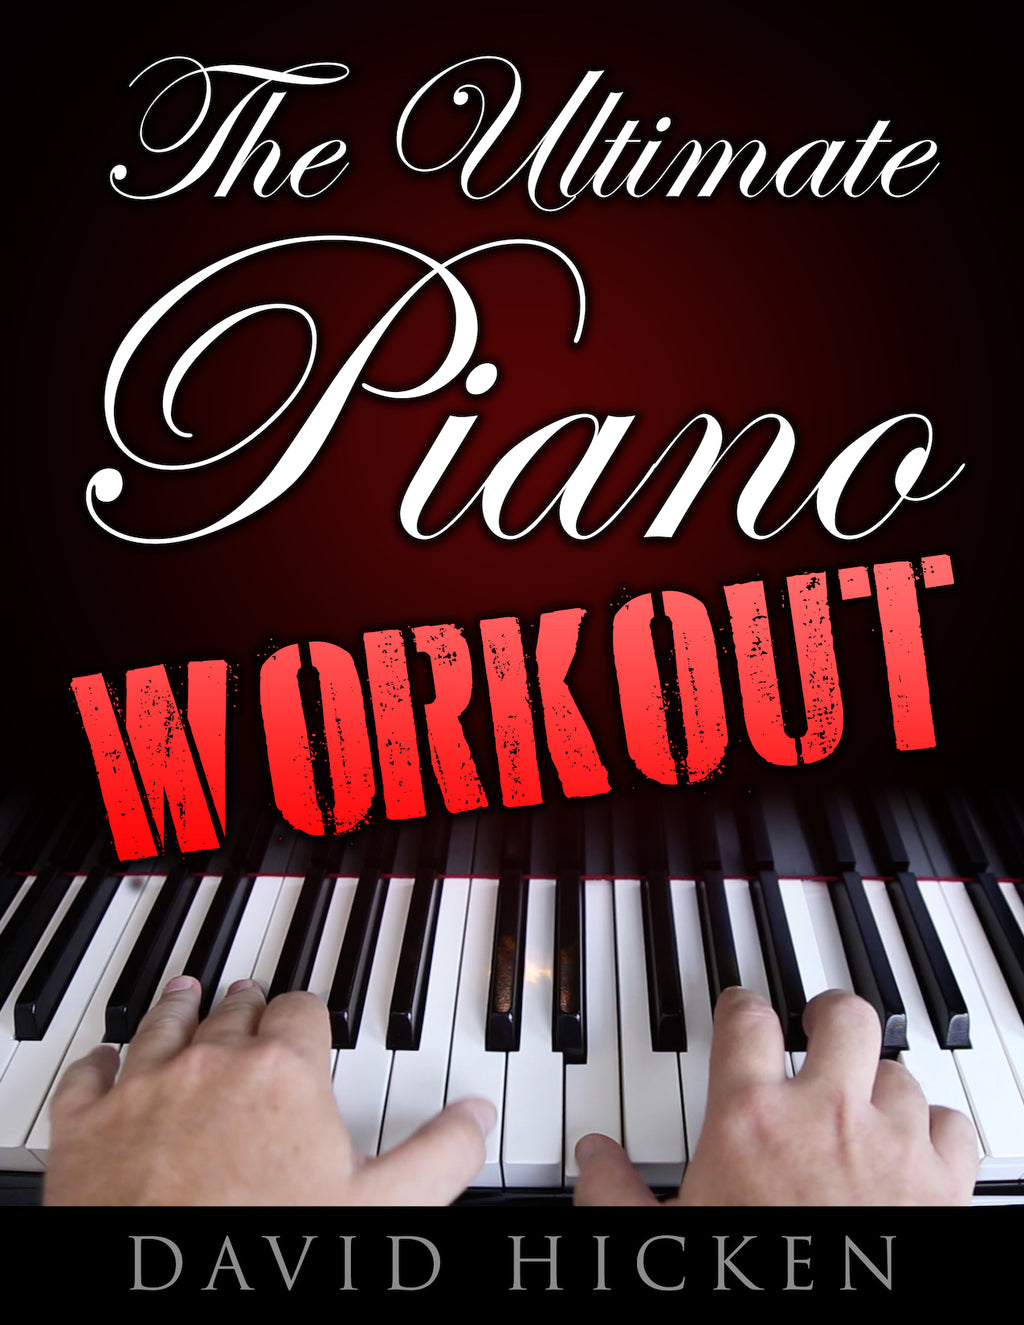 The Ultimate Piano Workout Book by David Hicken